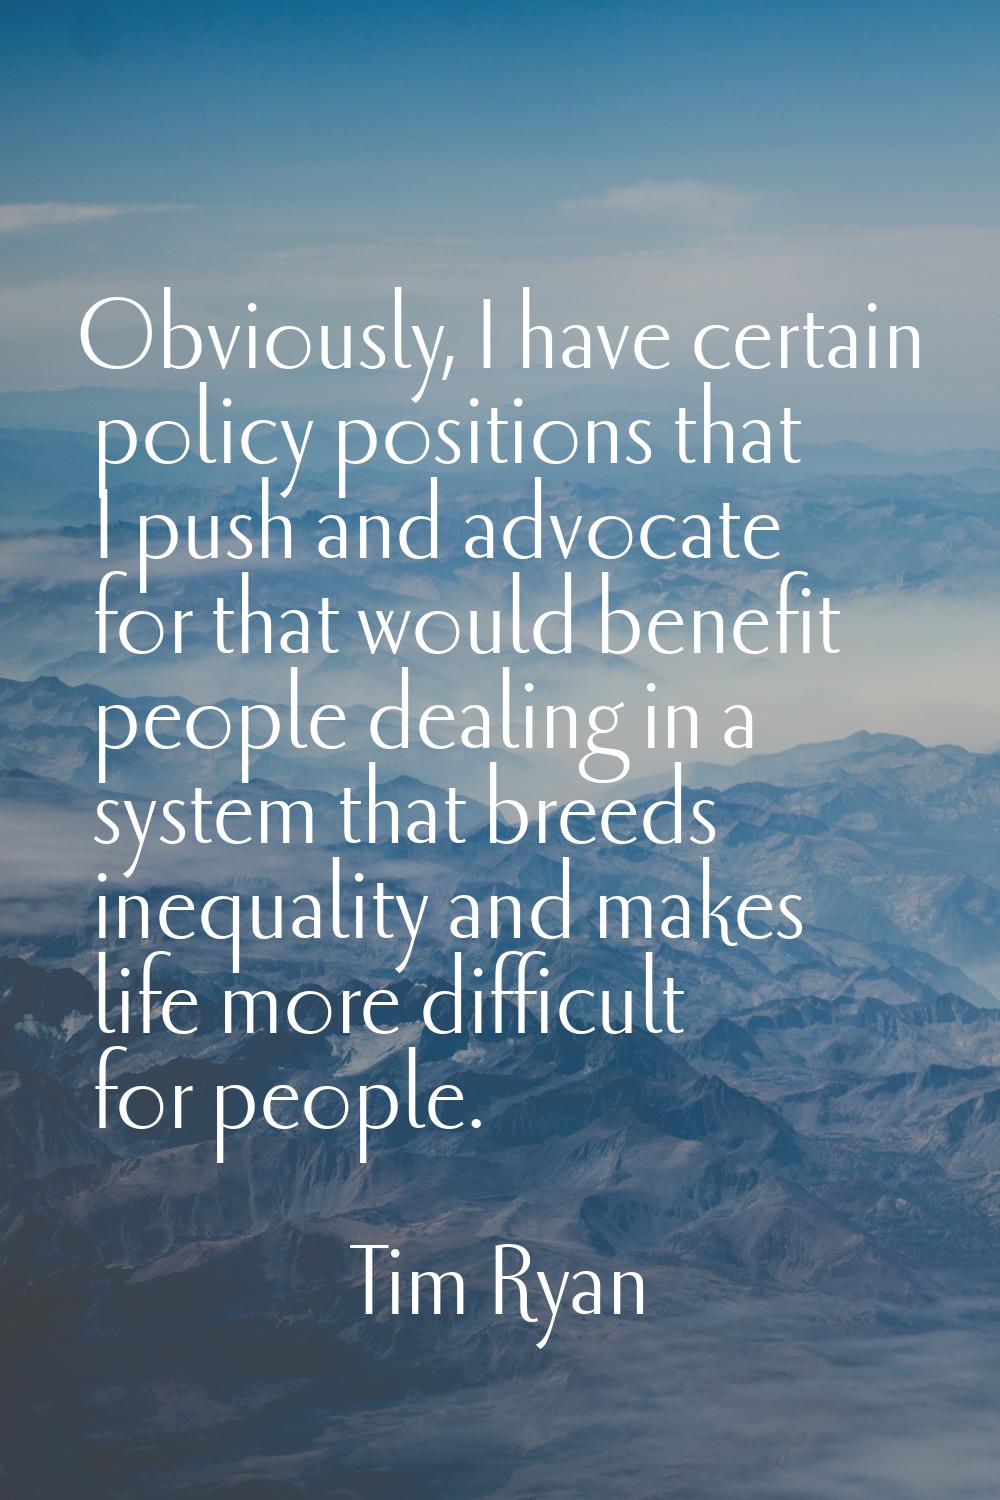 Obviously, I have certain policy positions that I push and advocate for that would benefit people d